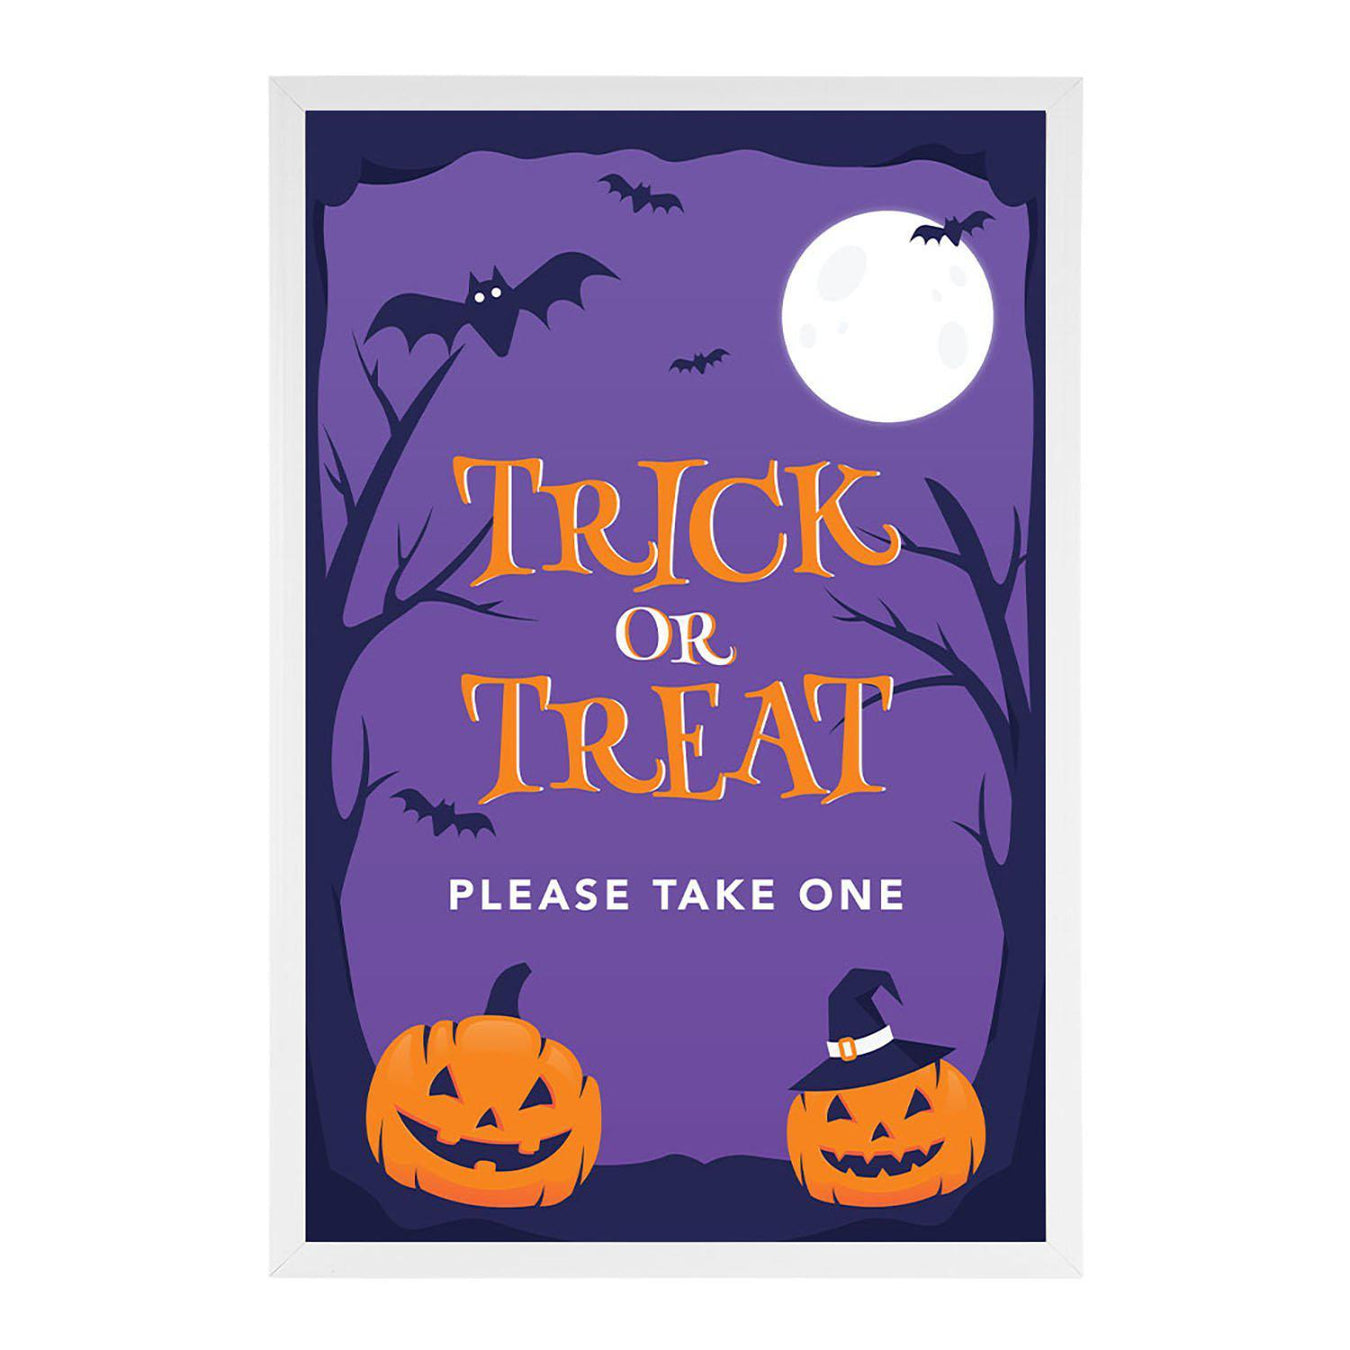 Halloween Supplies & Party Decorations